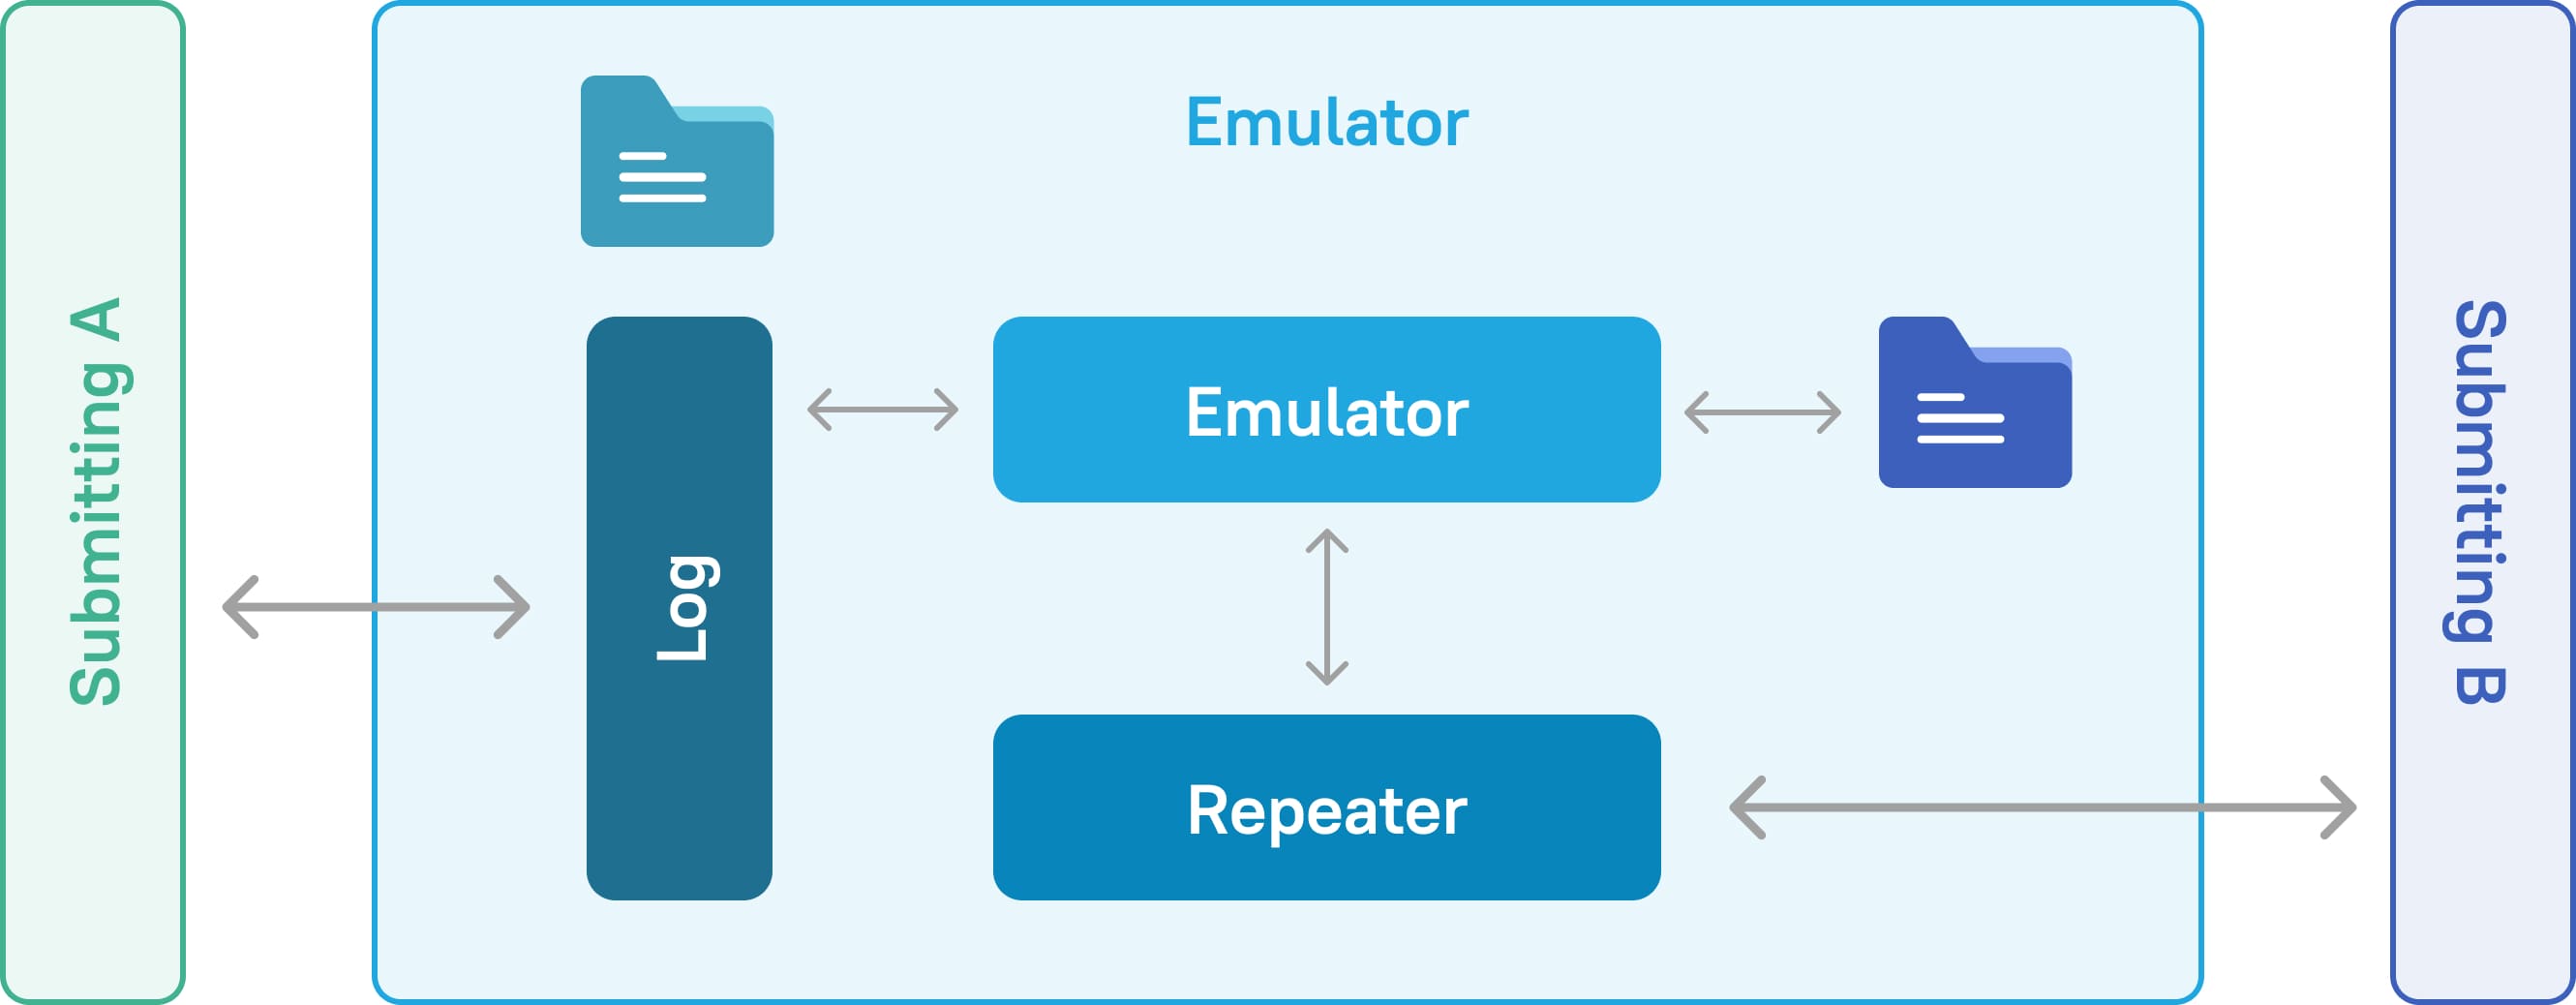 Using a REST request emulator cooperation architecture